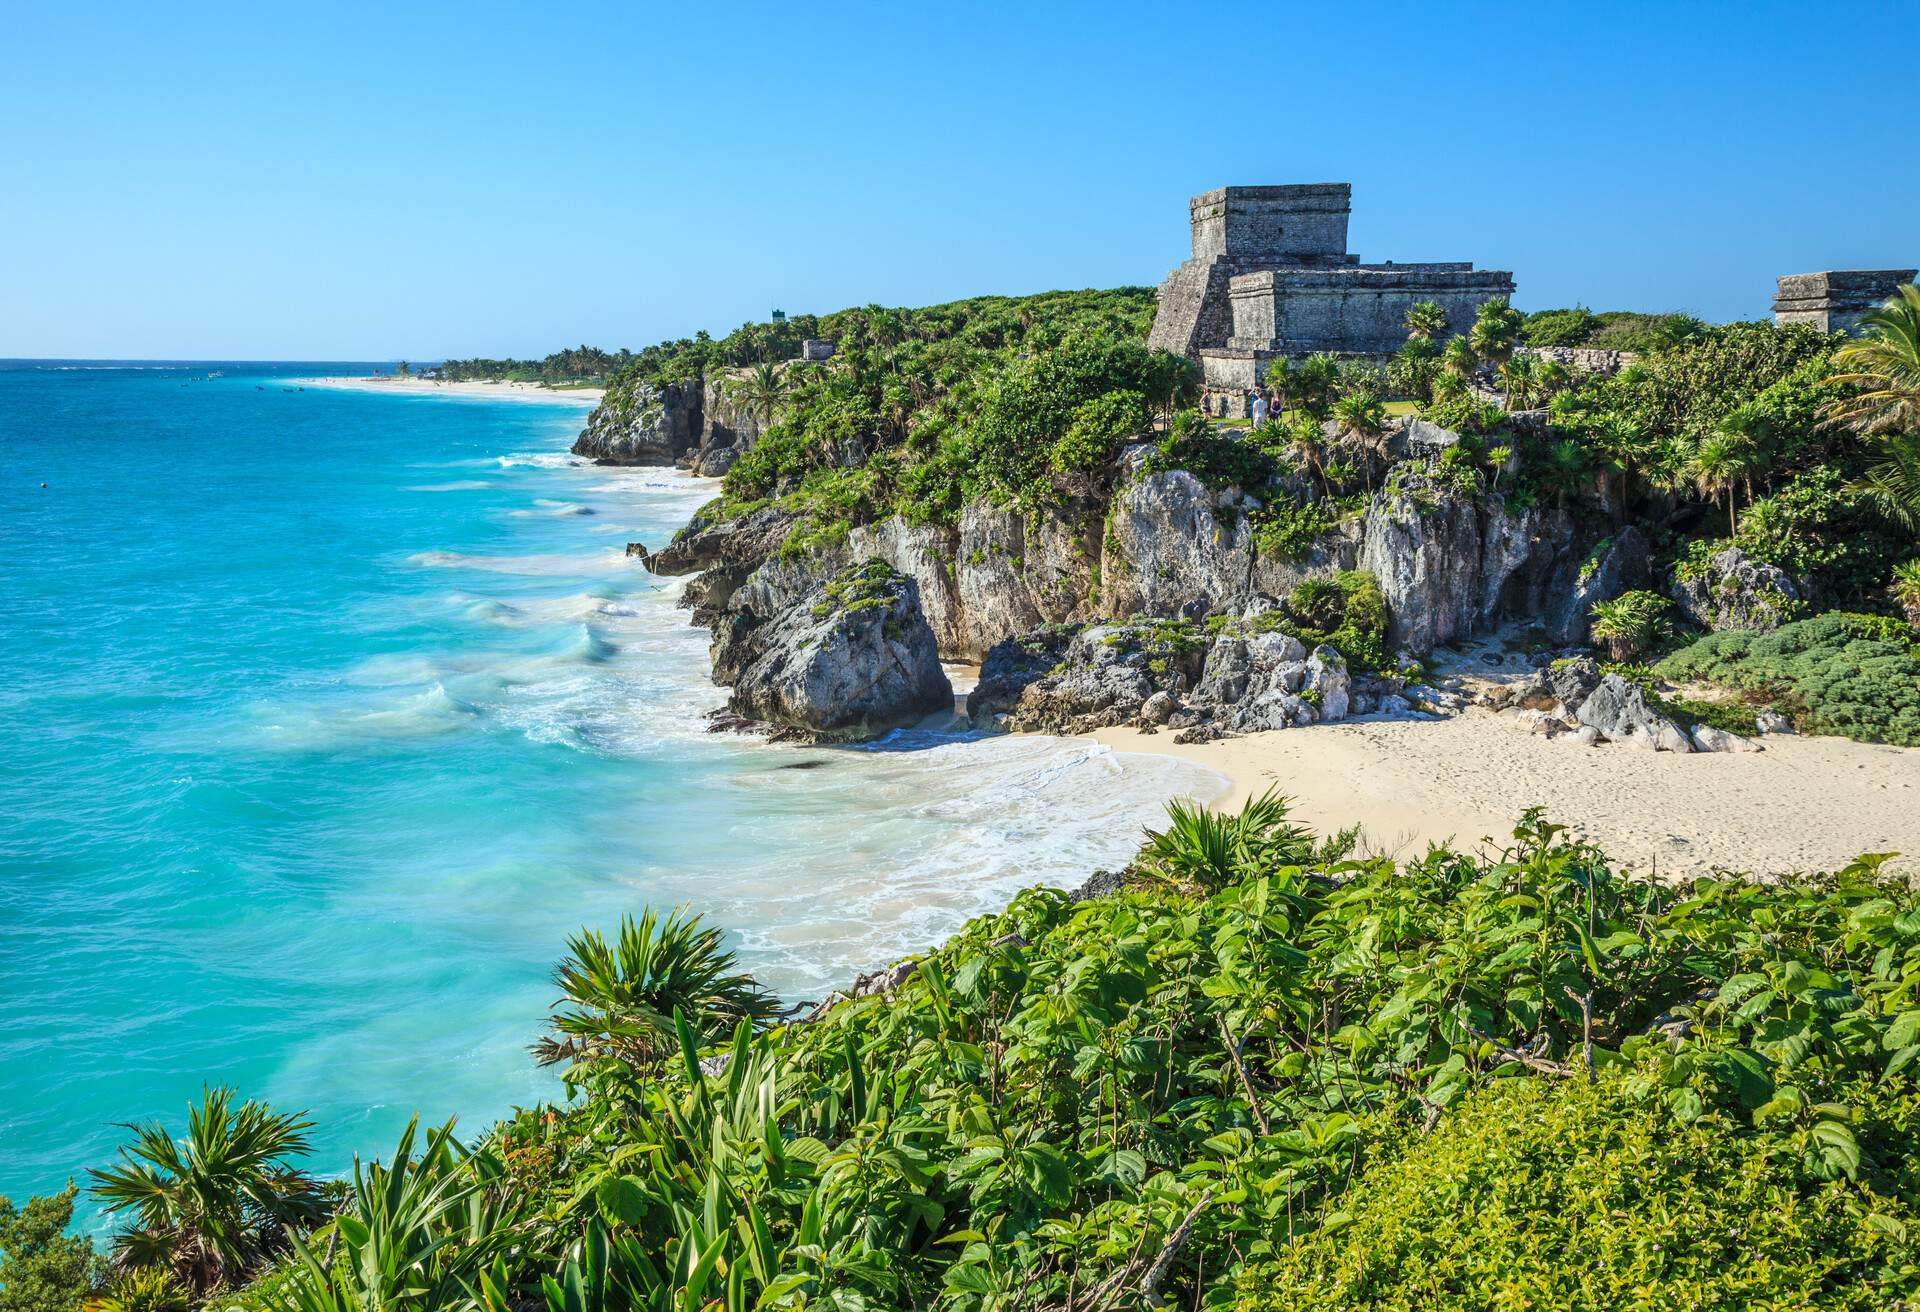 Tulum holds the honor of being the most picturesque archaeological site in the Riviera Maya and the only one to have been built overlooking the ocean. A visit here offers spectacular views of the Riviera Maya beaches, Caribbean Sea and surrounding coastal region.